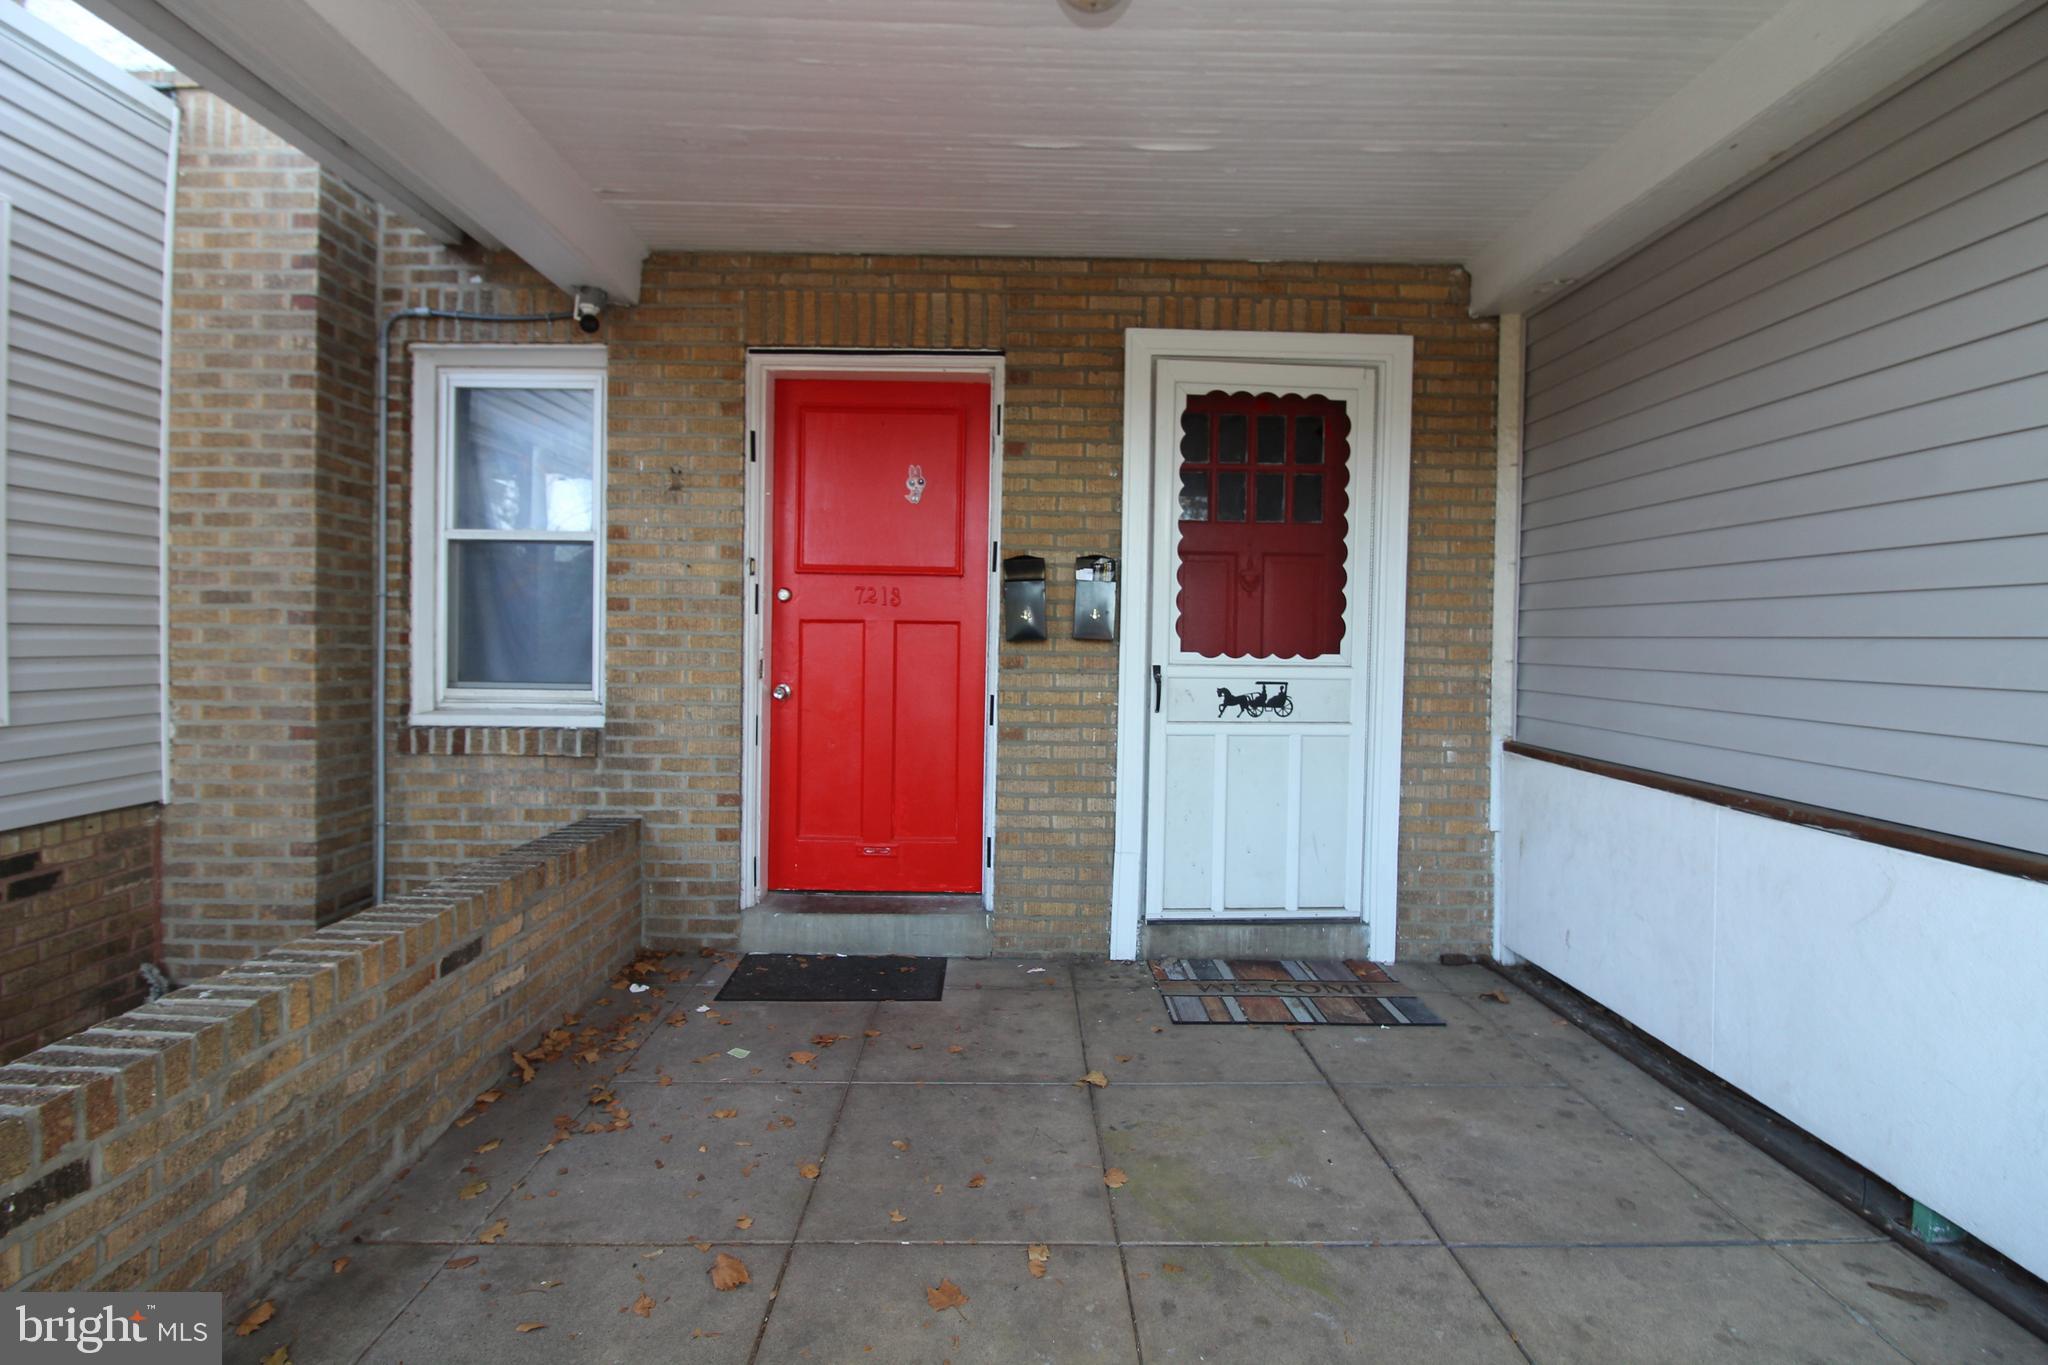 a view of a house with red door and brick walls